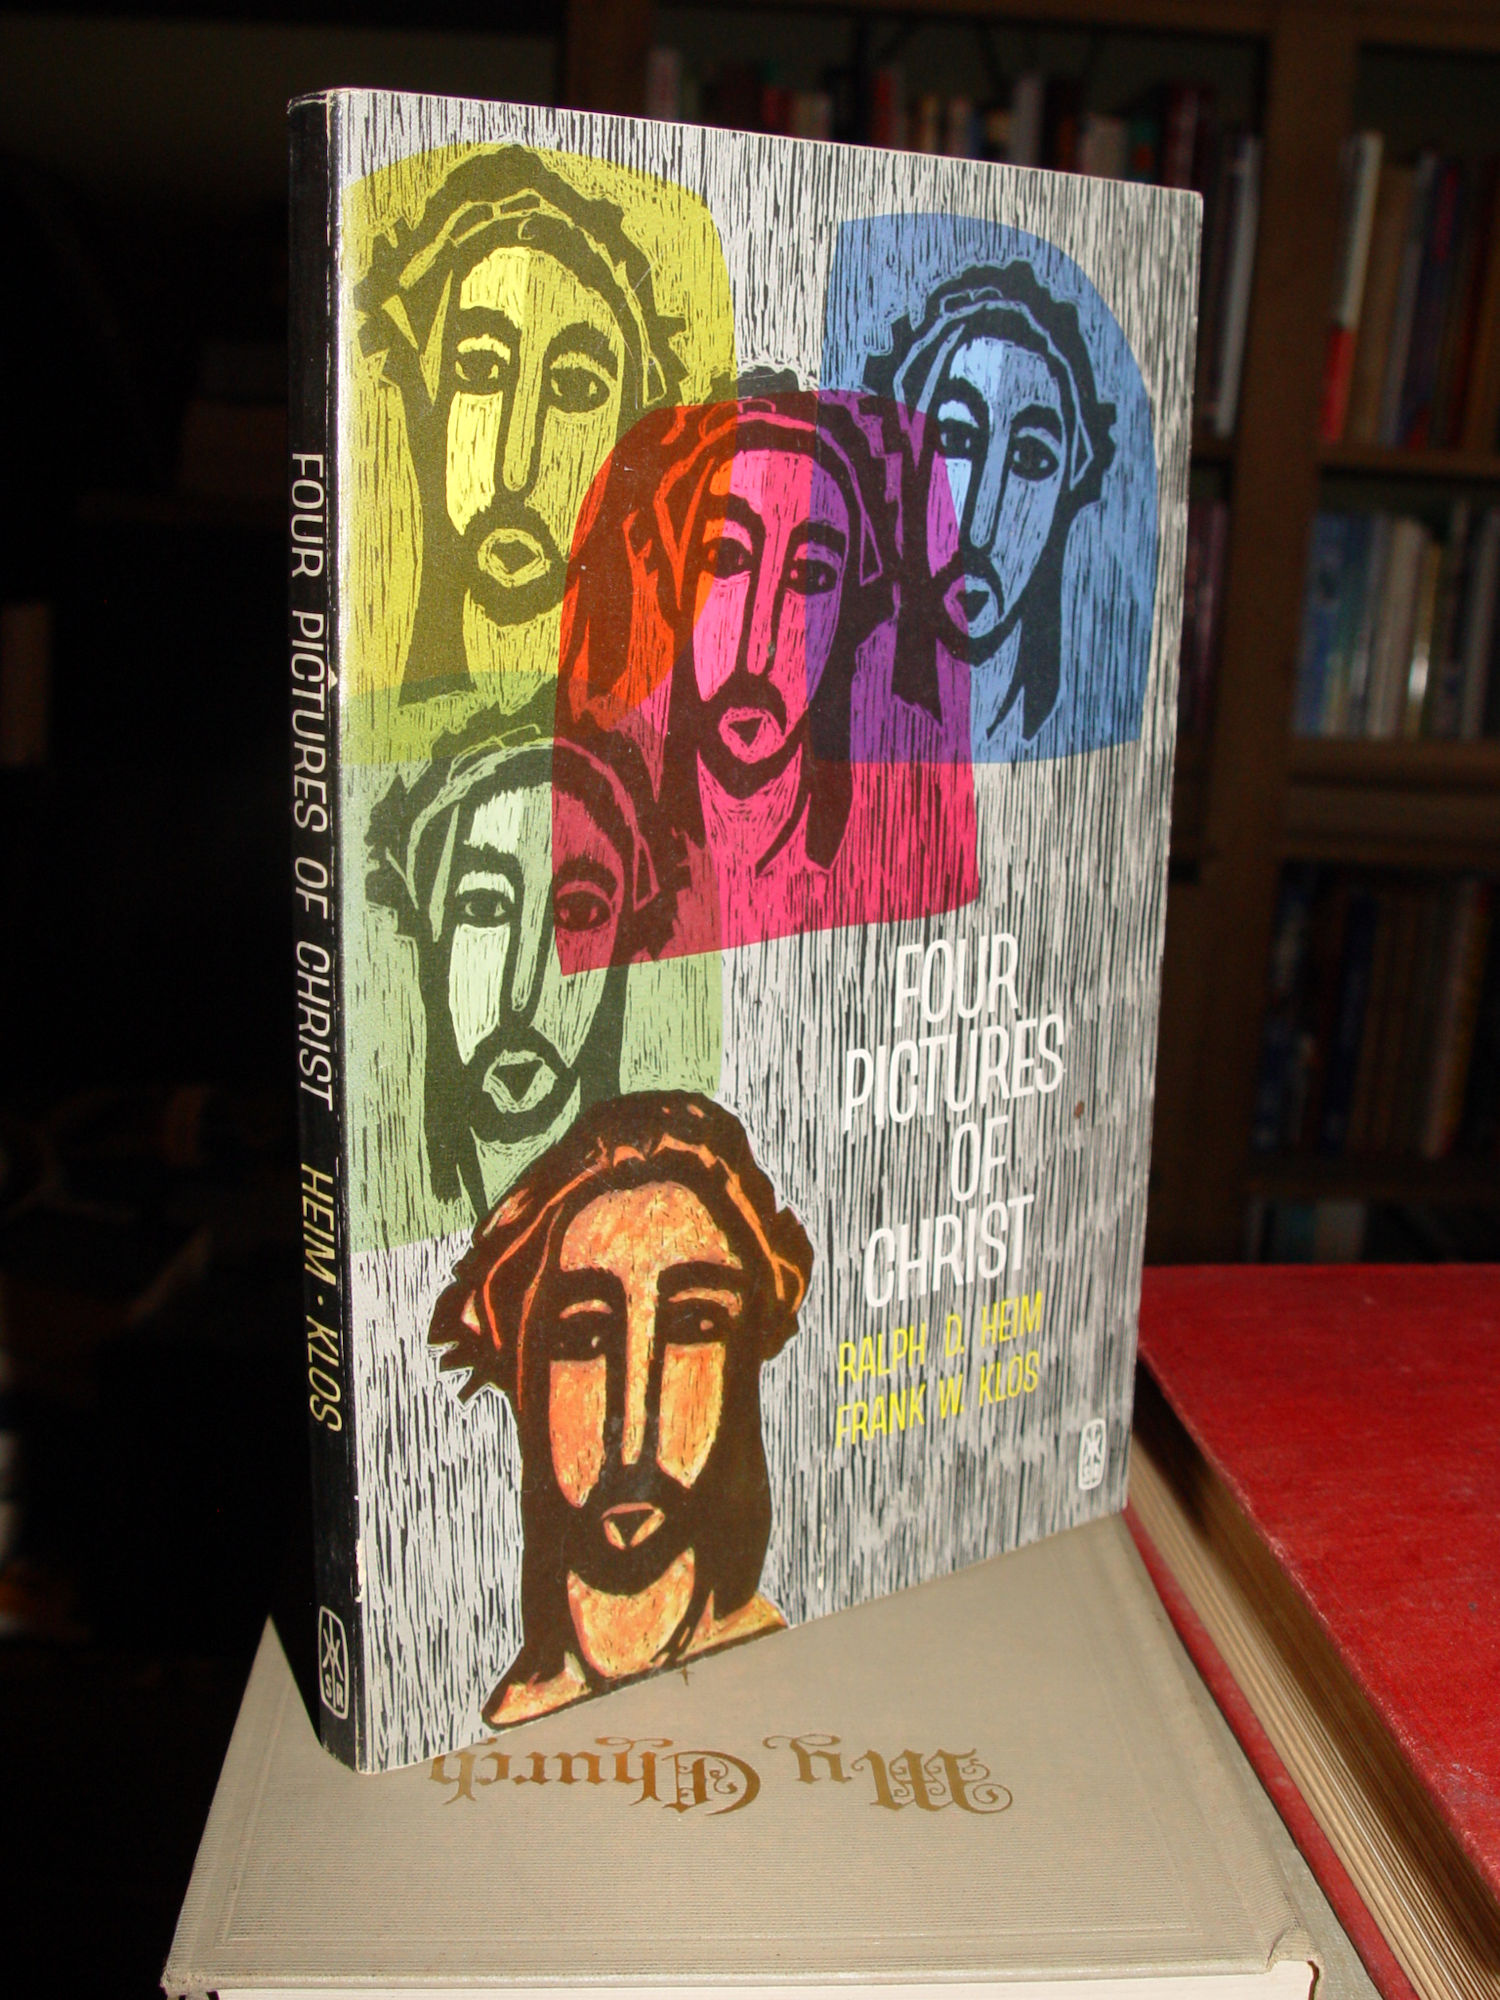 Four pictures of Christ 1965 by Ralph
                        Daniel Heim